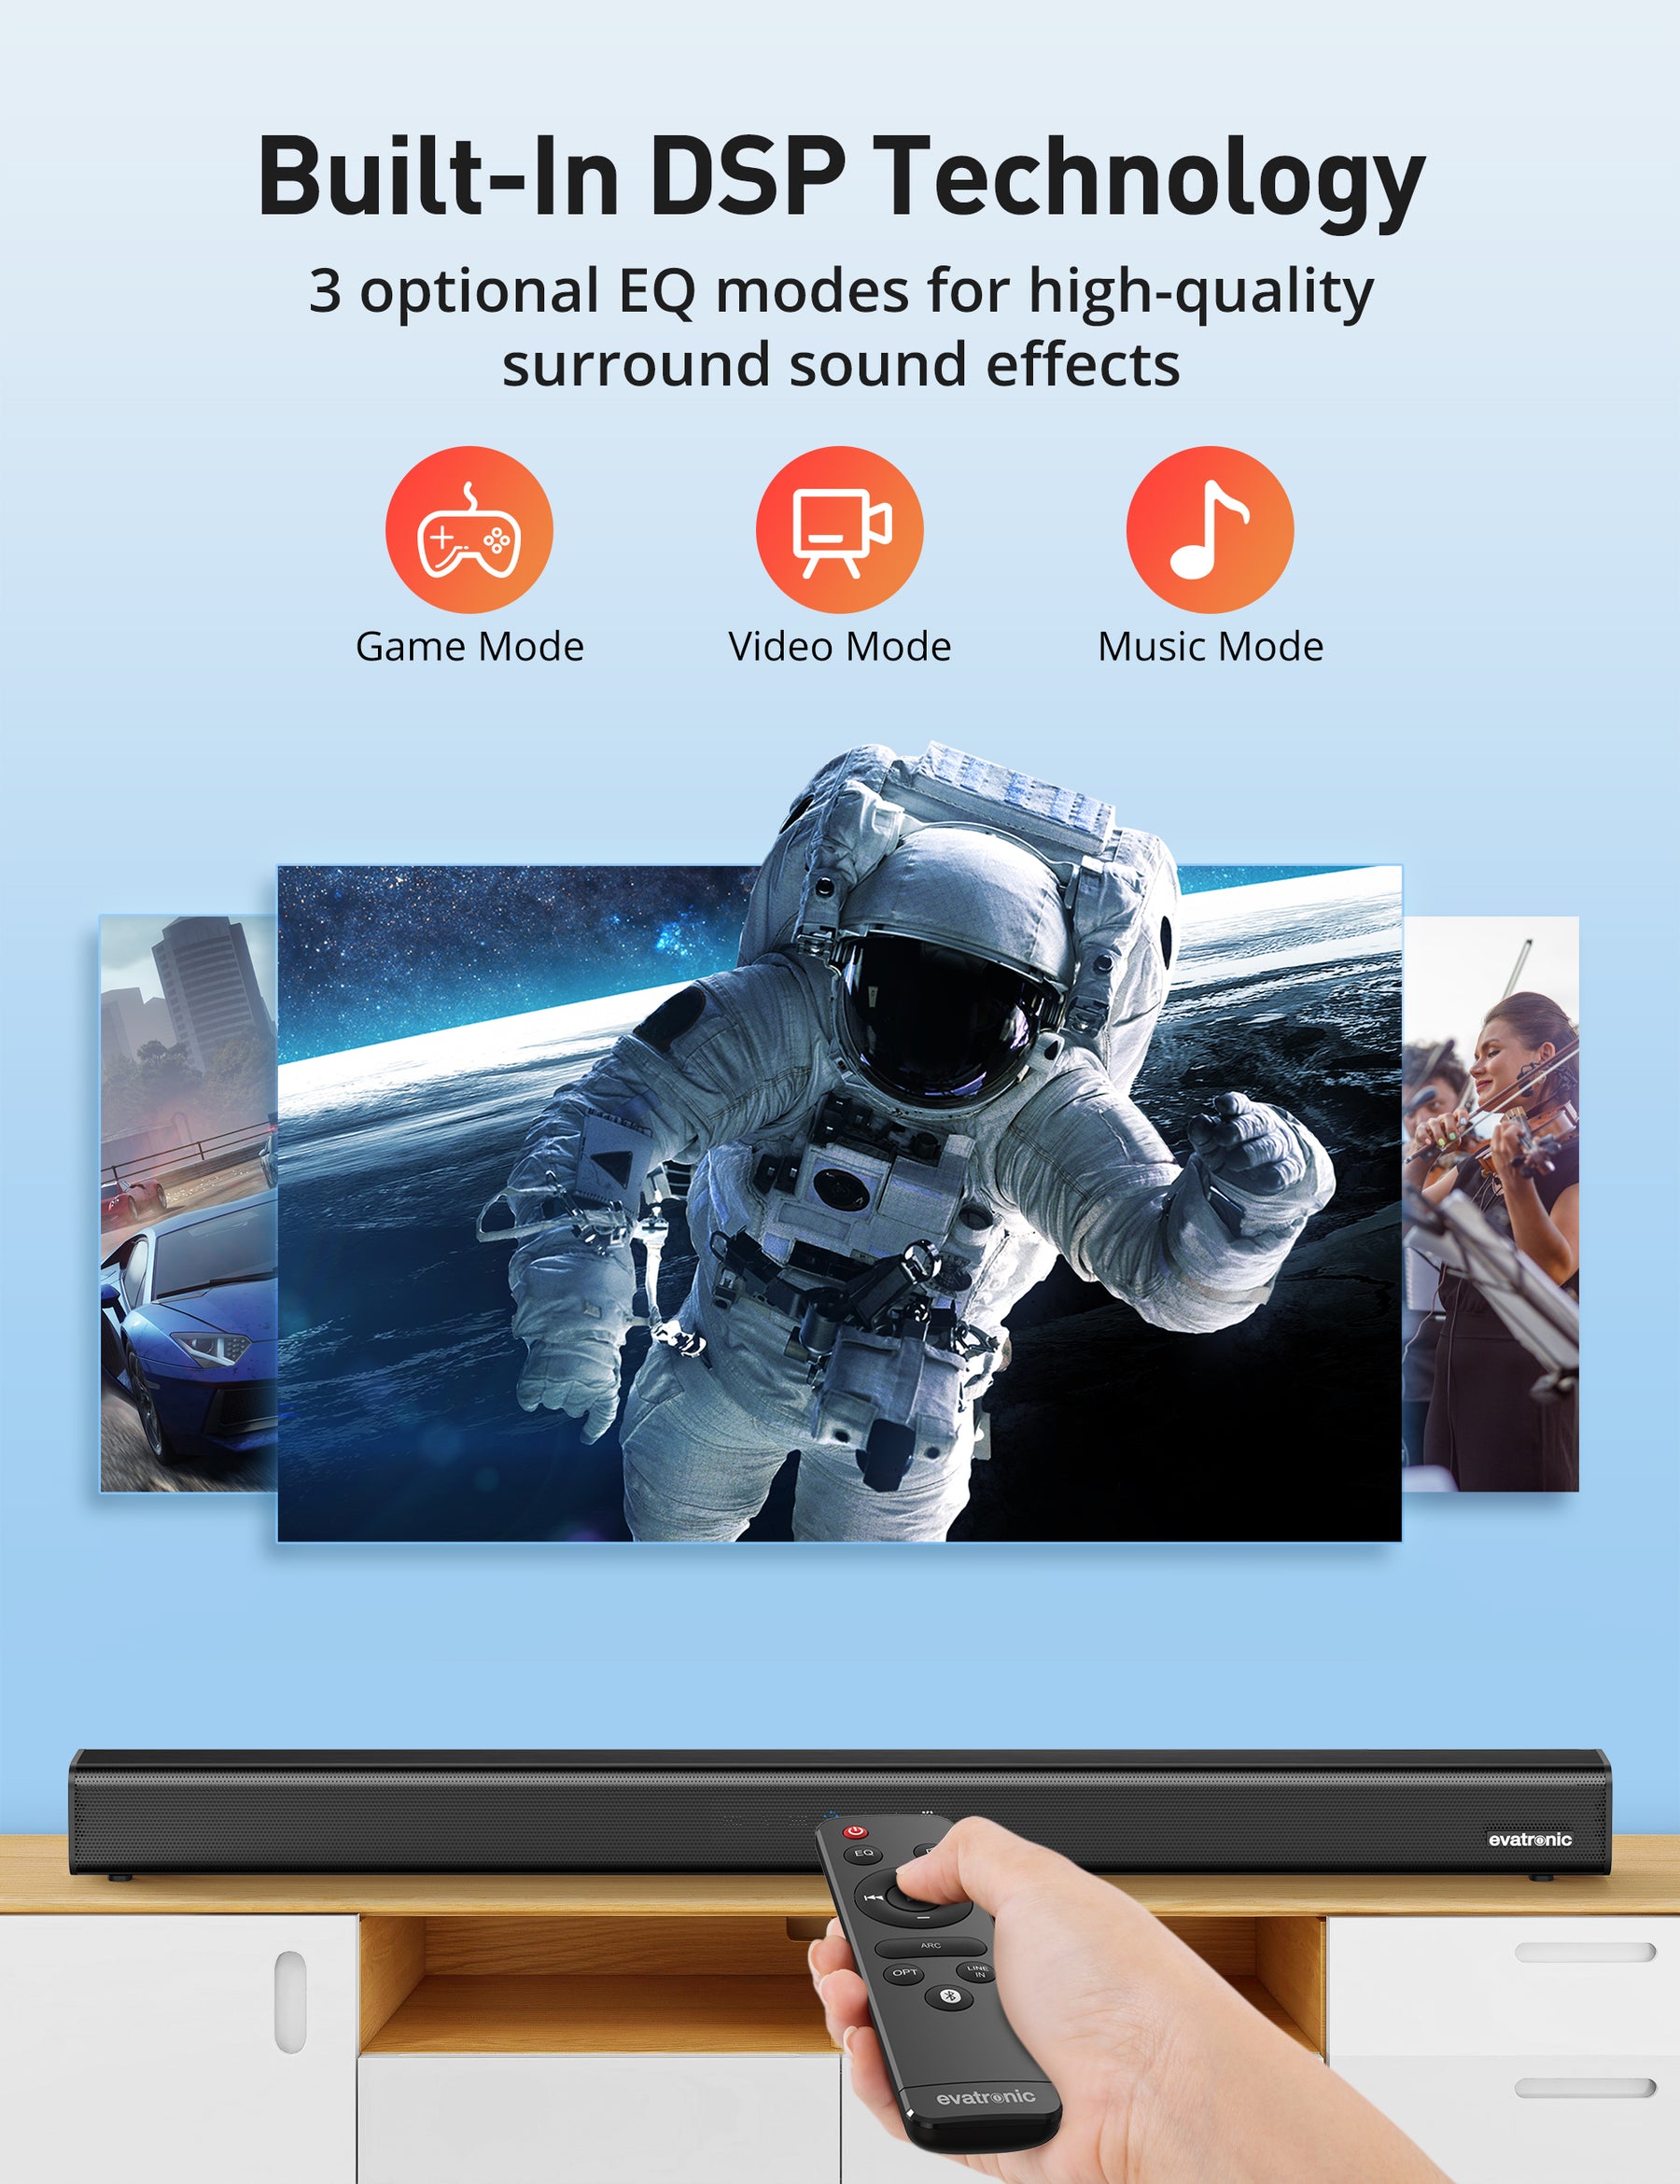 Built-In DSP Technology3 optional EQ modes for high-quality surround sound effects 